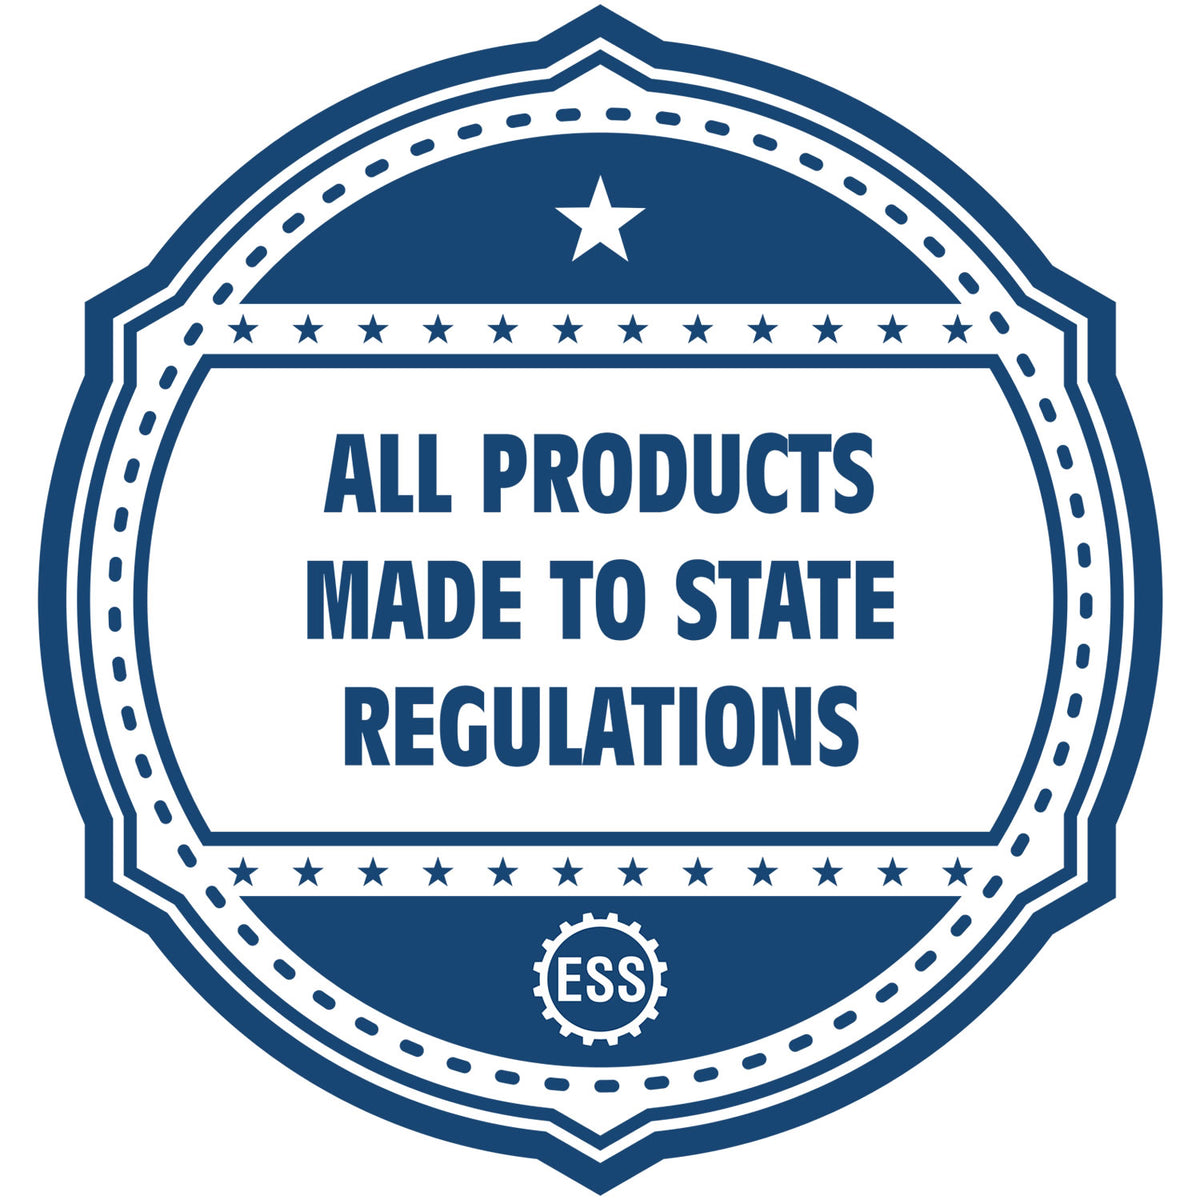 A blue icon or badge for the Gift Vermont Architect Seal showing that this product is made in compliance with state regulations.